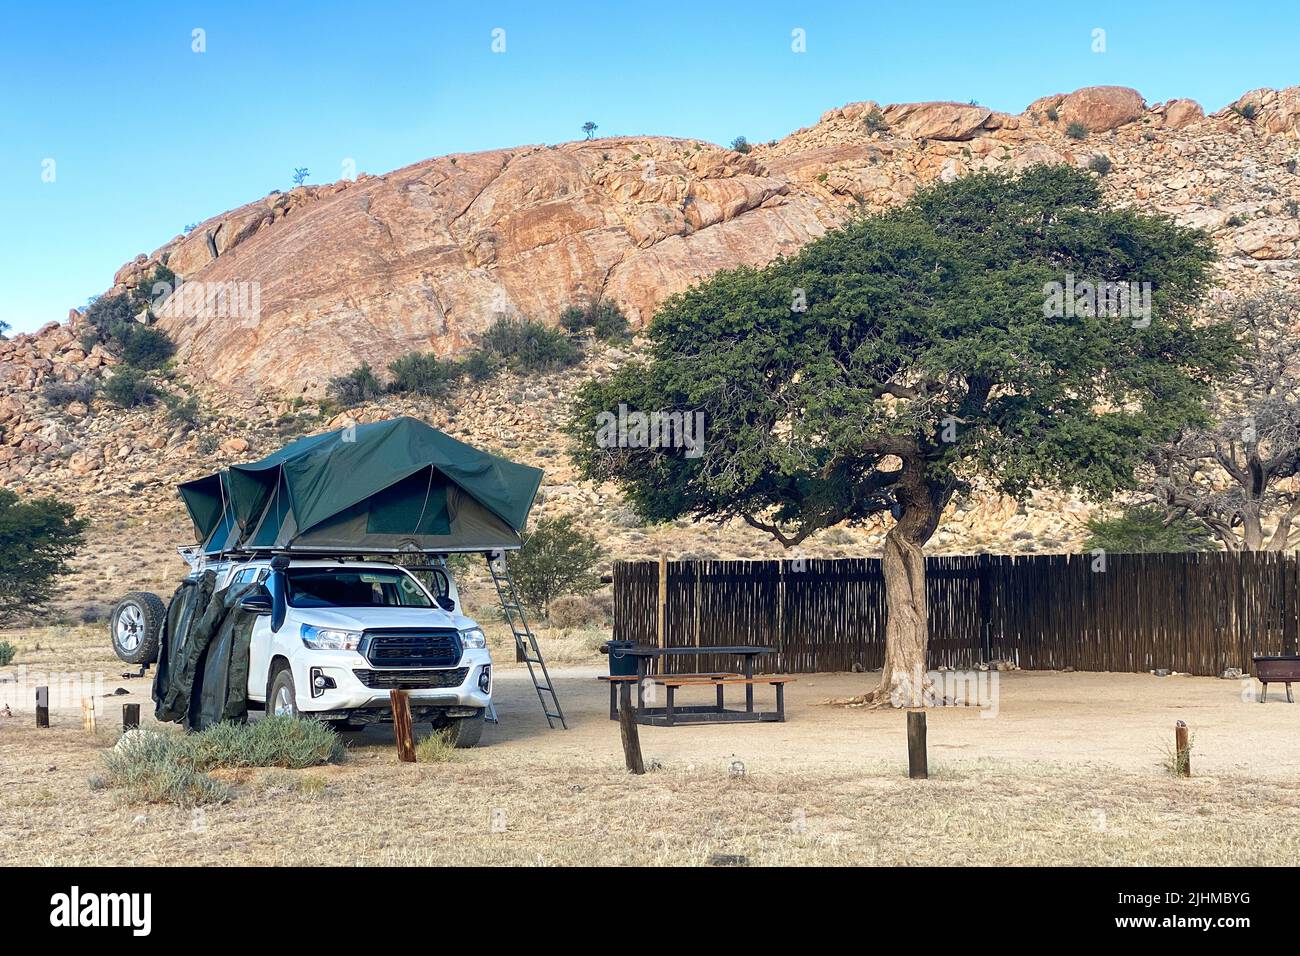 Camping in a roof tent on a 4x4 in Namibia in Africa Stock Photo